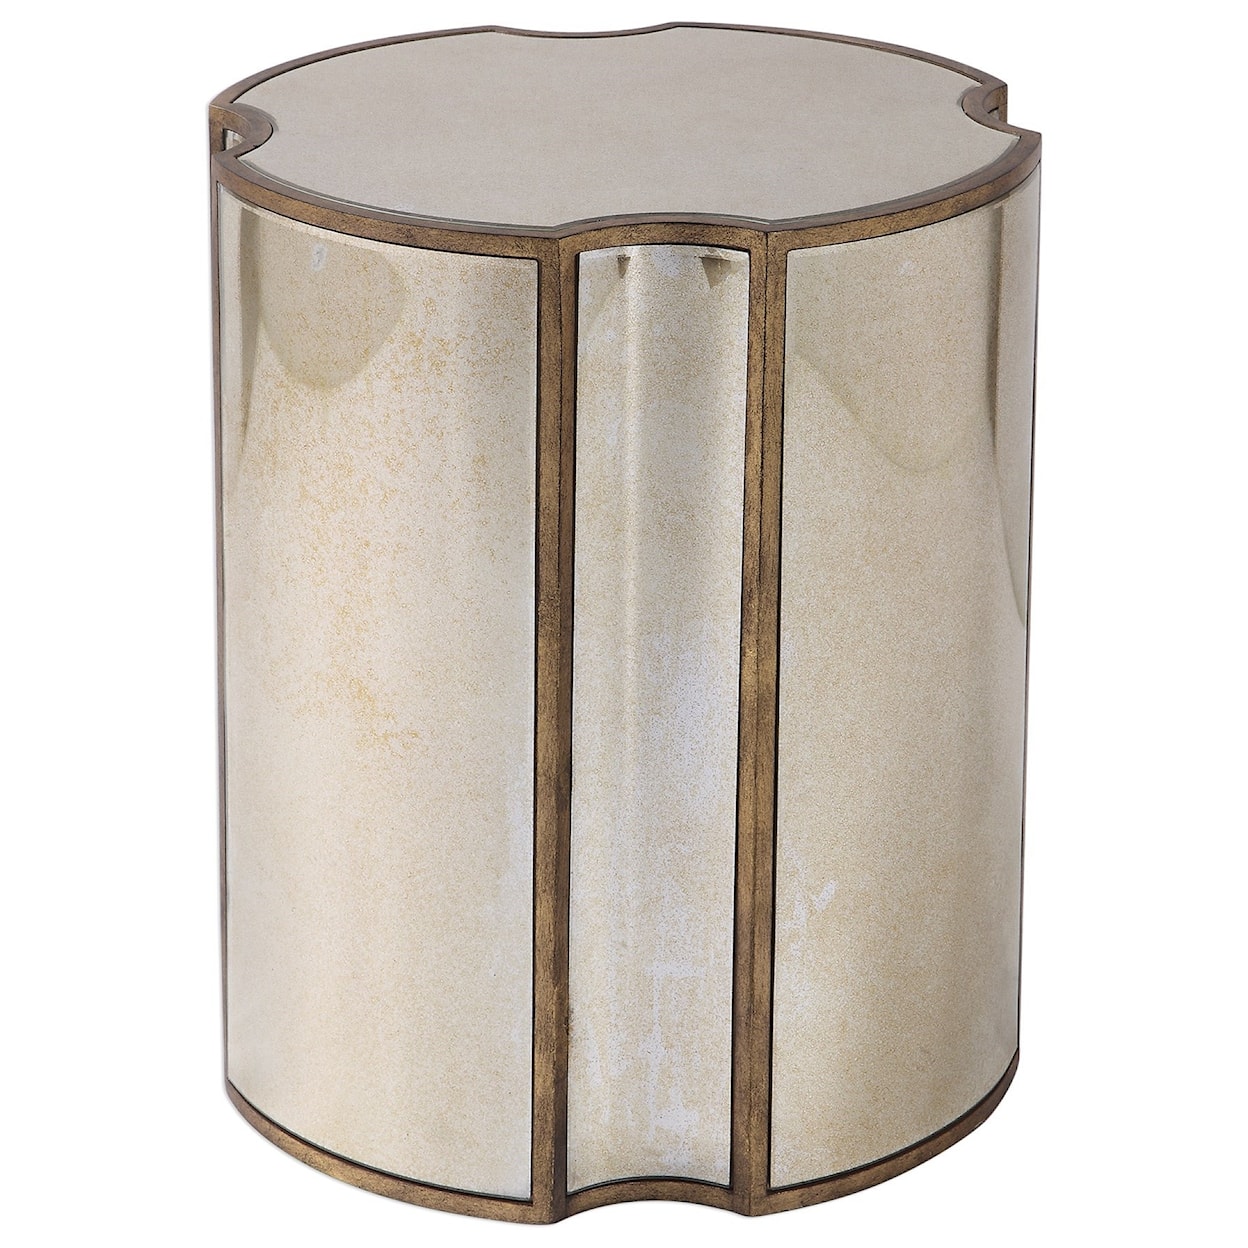 Uttermost Accent Furniture - Occasional Tables Harlow Mirrored Accent Table